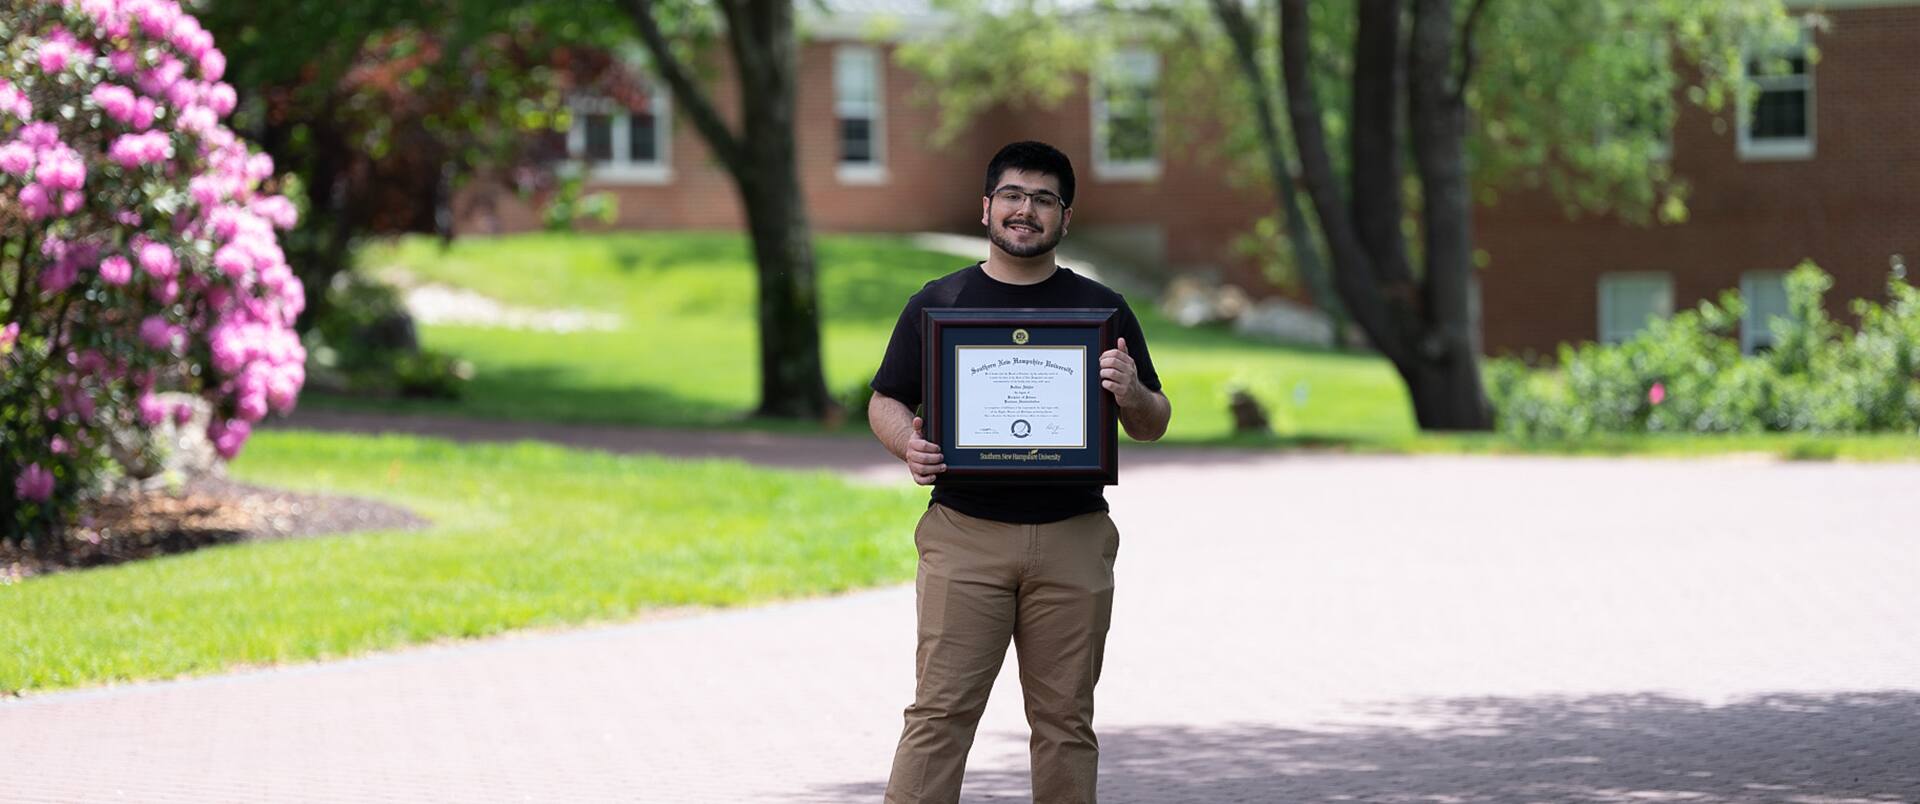 Sultan Ahktar, who earned his degree from SNHU in 2019, standing on a quiet street holding his framed diploma.